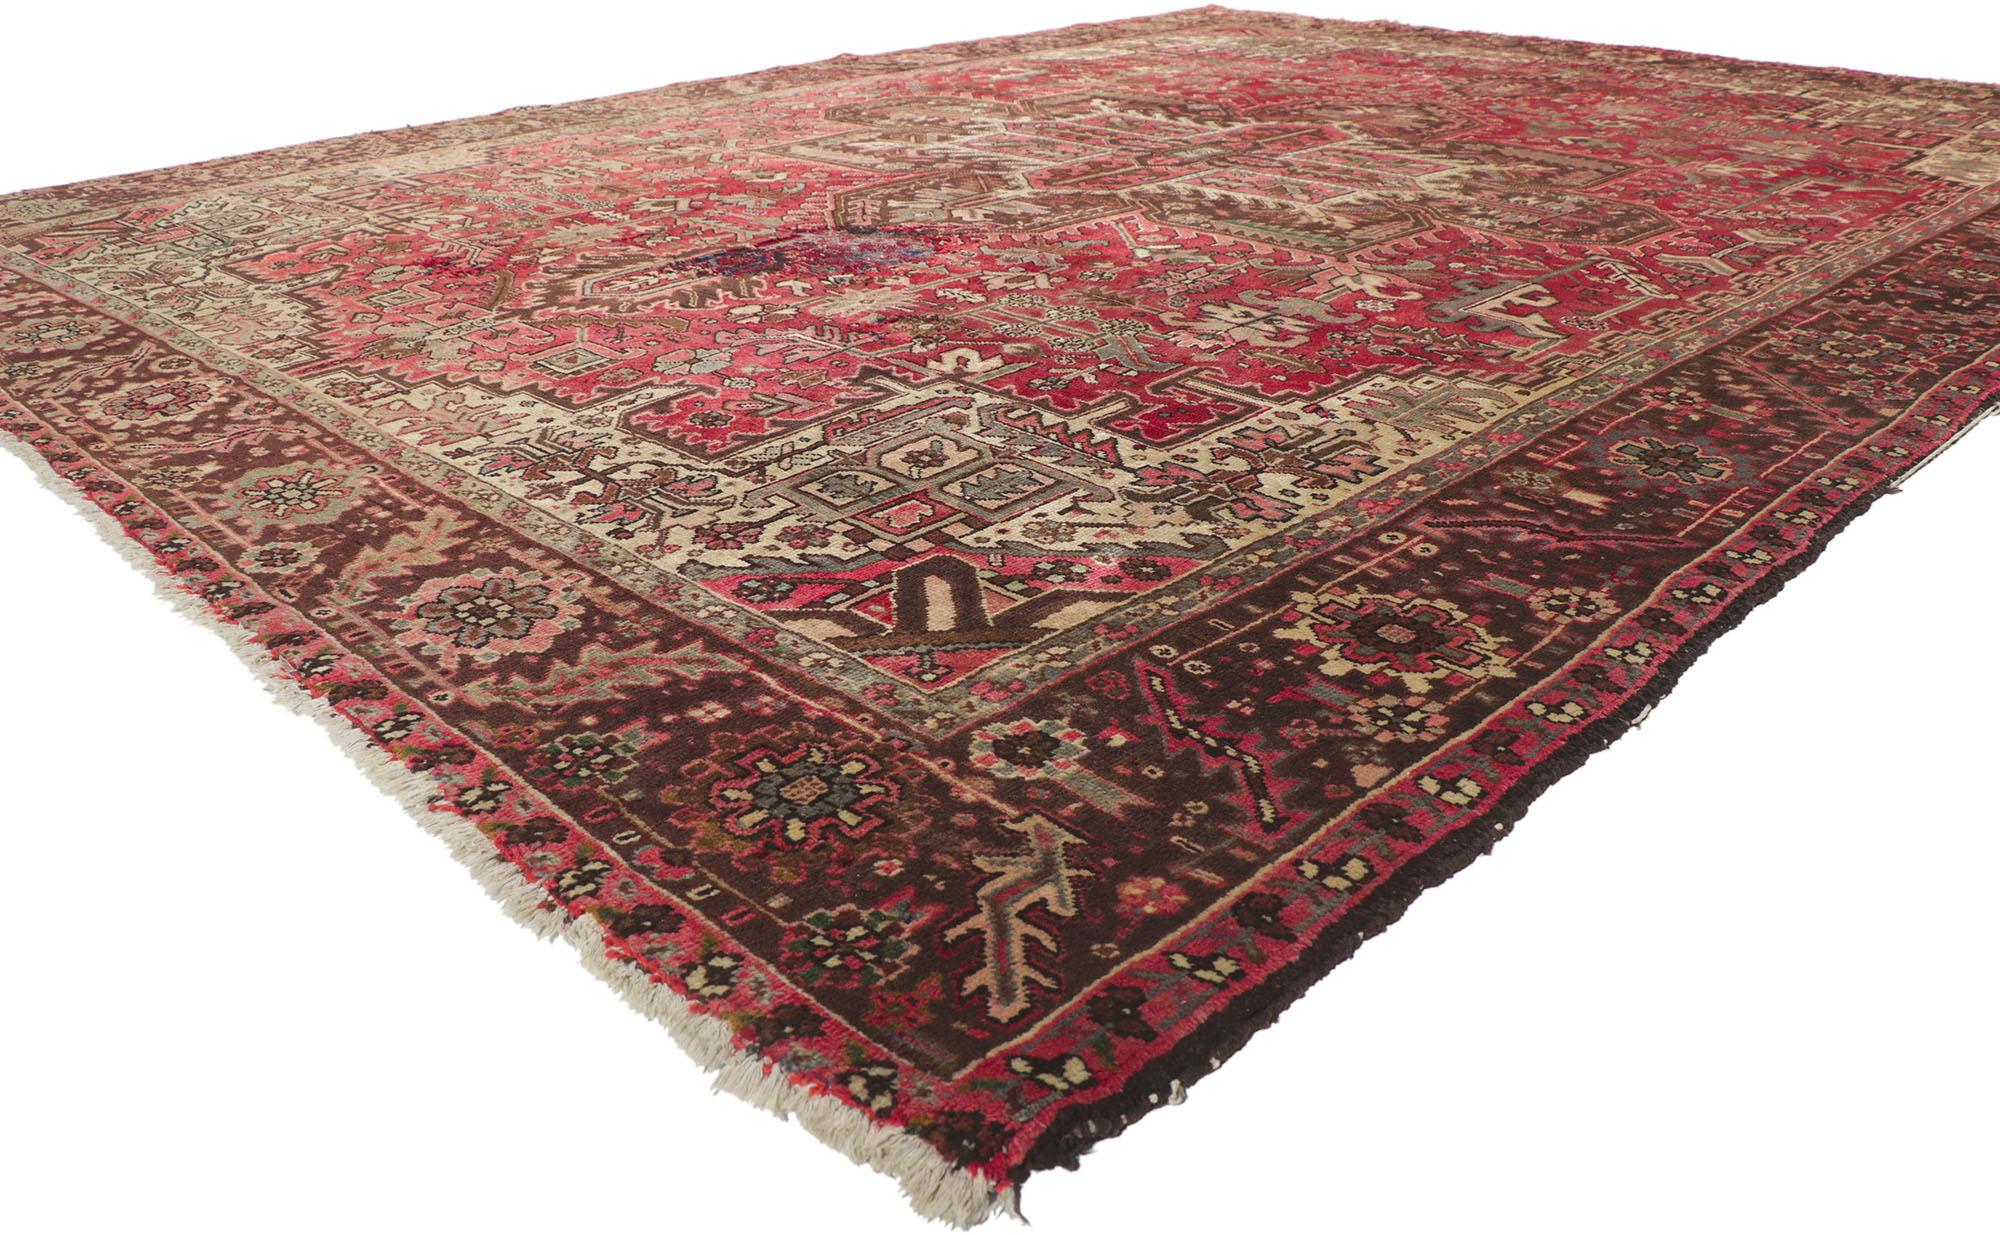 78289 Vintage Persian Heriz Rug, 10'00 x 12'11. Delve into the enchanting world of Heriz rugs, which trace their origins to the picturesque northwestern region of Iran, renowned for their exceptional qualities. Handcrafted with meticulous attention